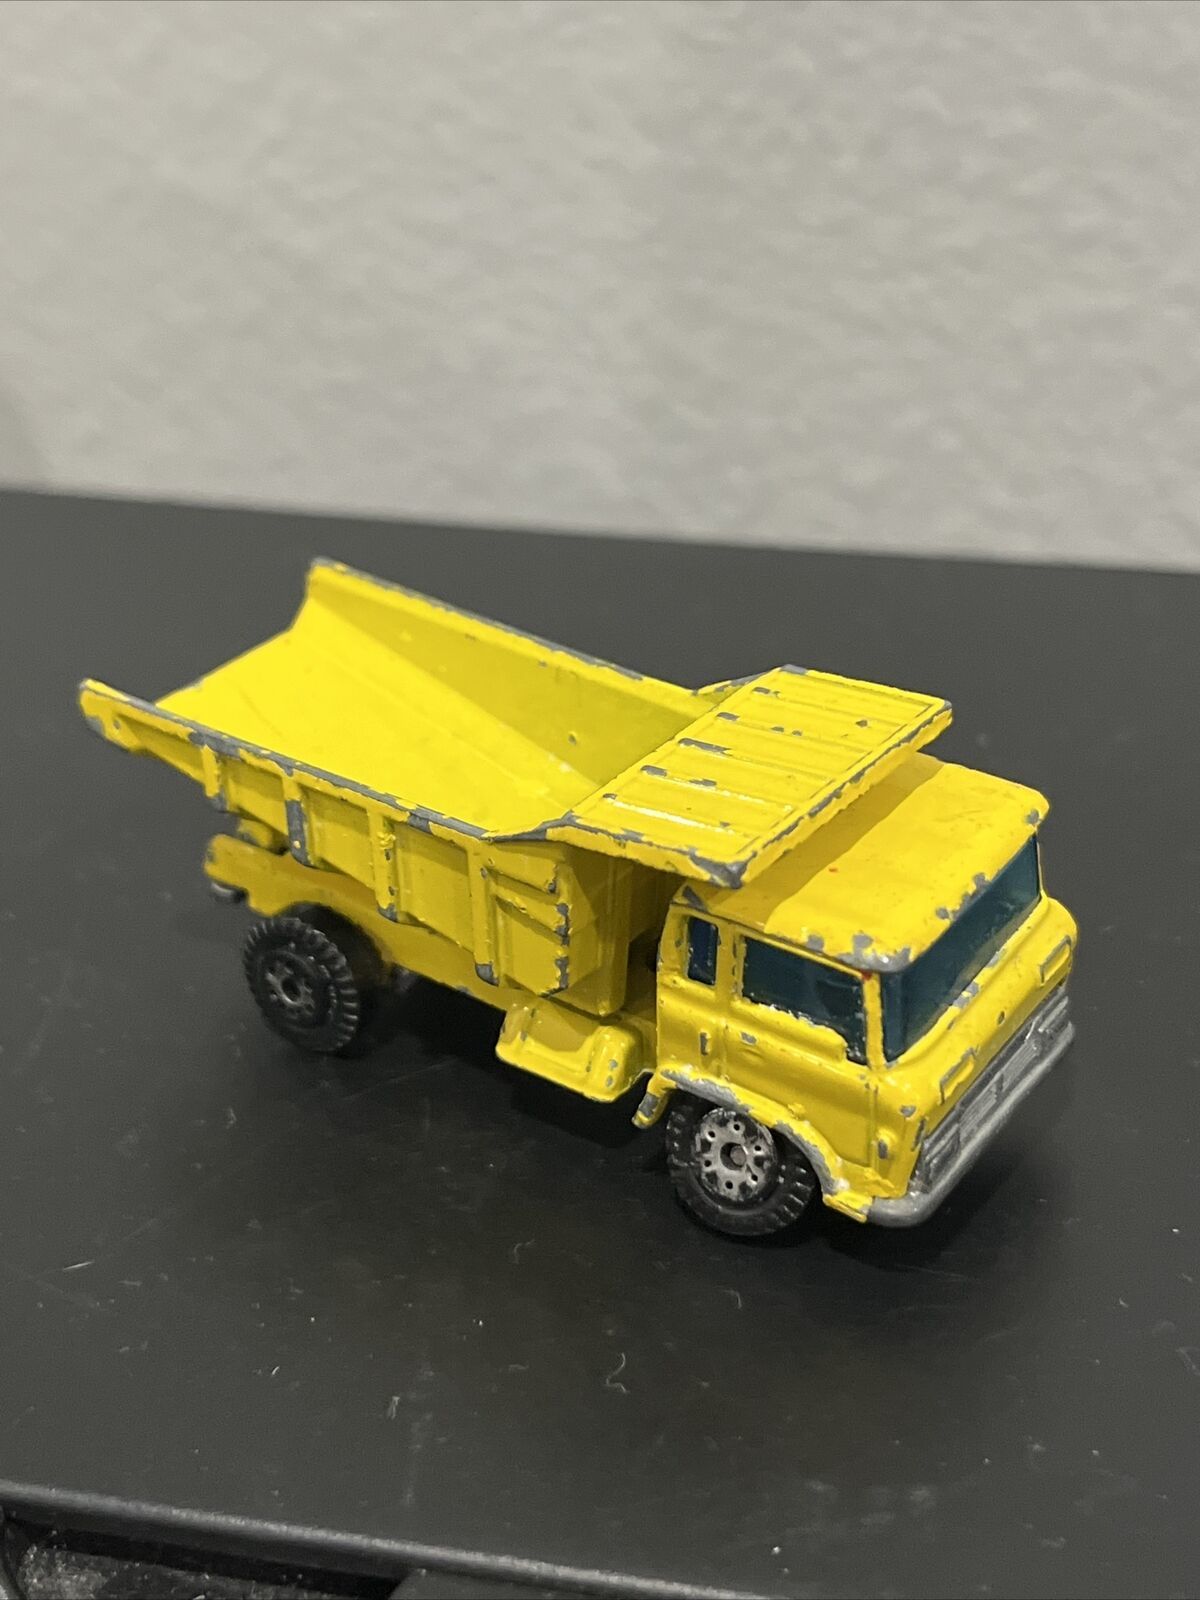 Yatming Dump Truck COE Lighter Yellow Cab-Over-Engine No# - 2 3/4" Long - £7.65 GBP